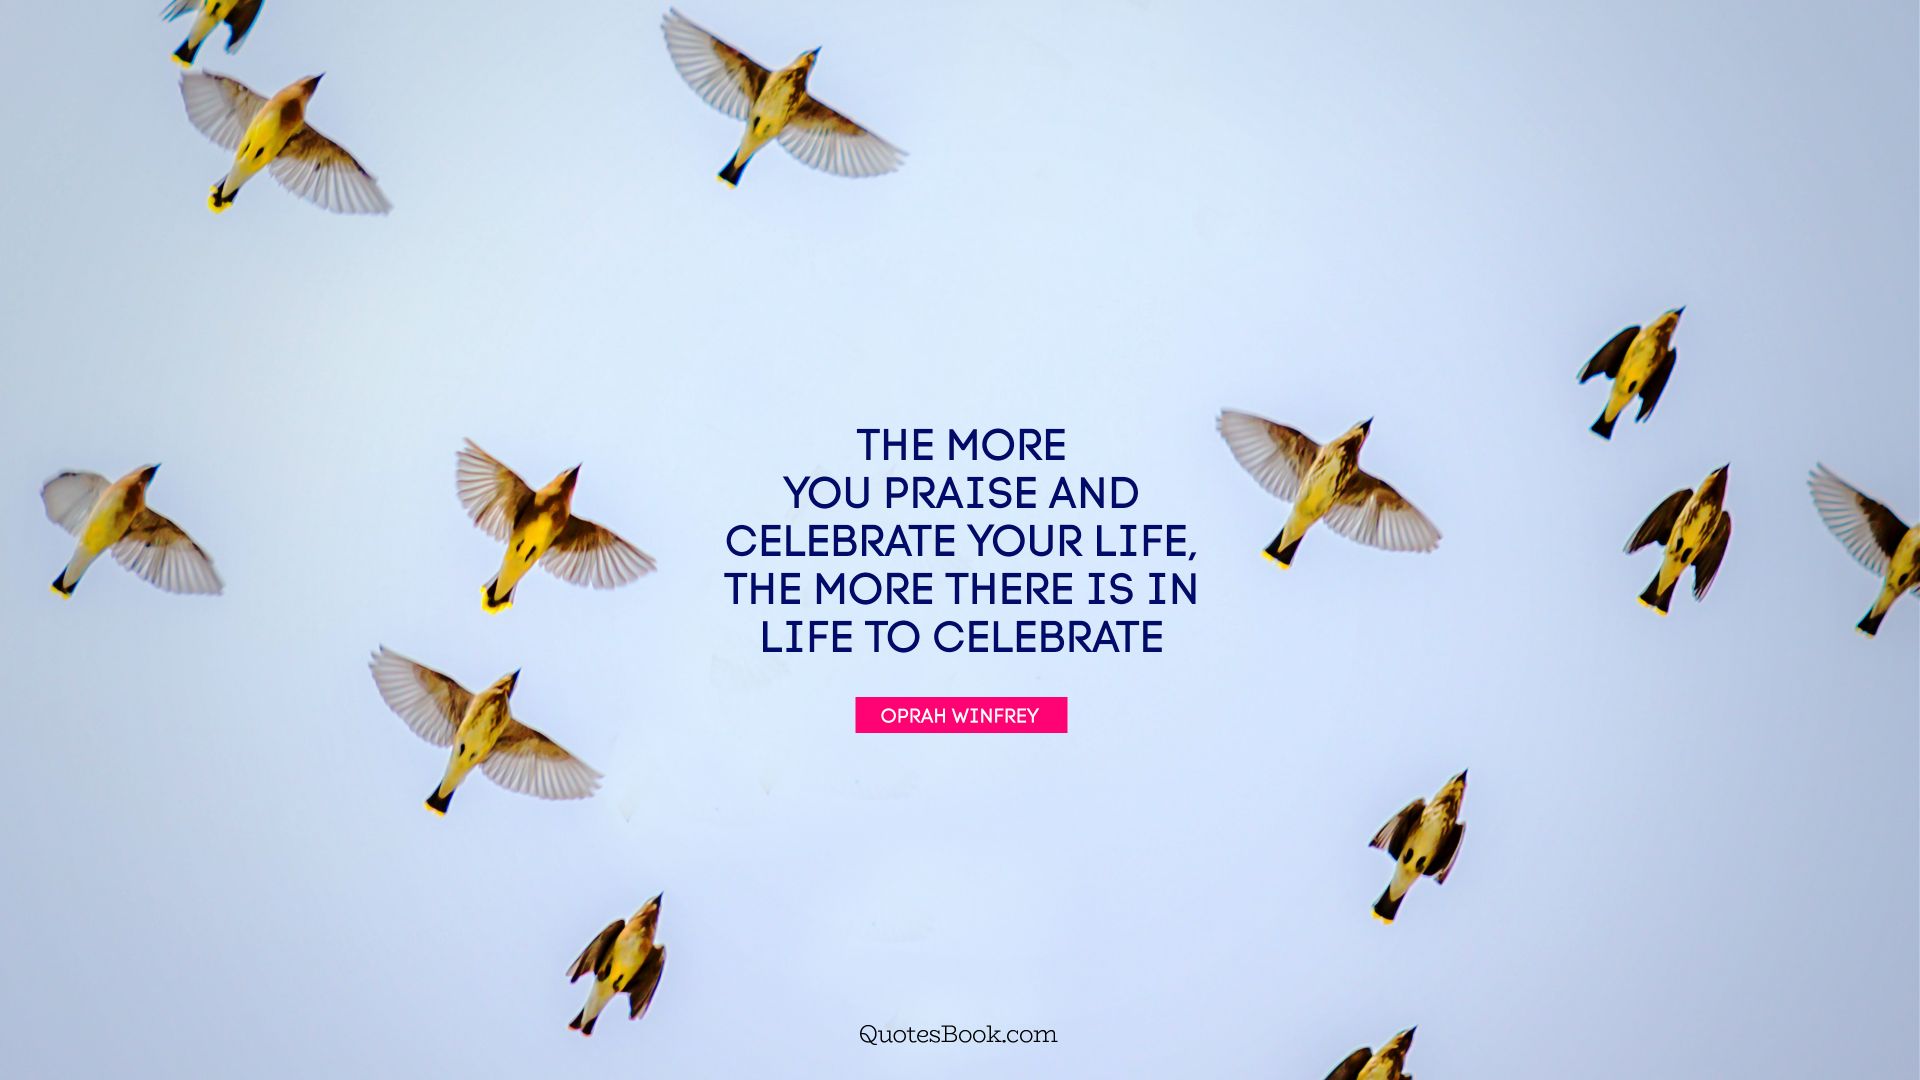 The more you praise and celebrate your life, the more there is in life to celebrate. - Quote by Oprah Winfrey